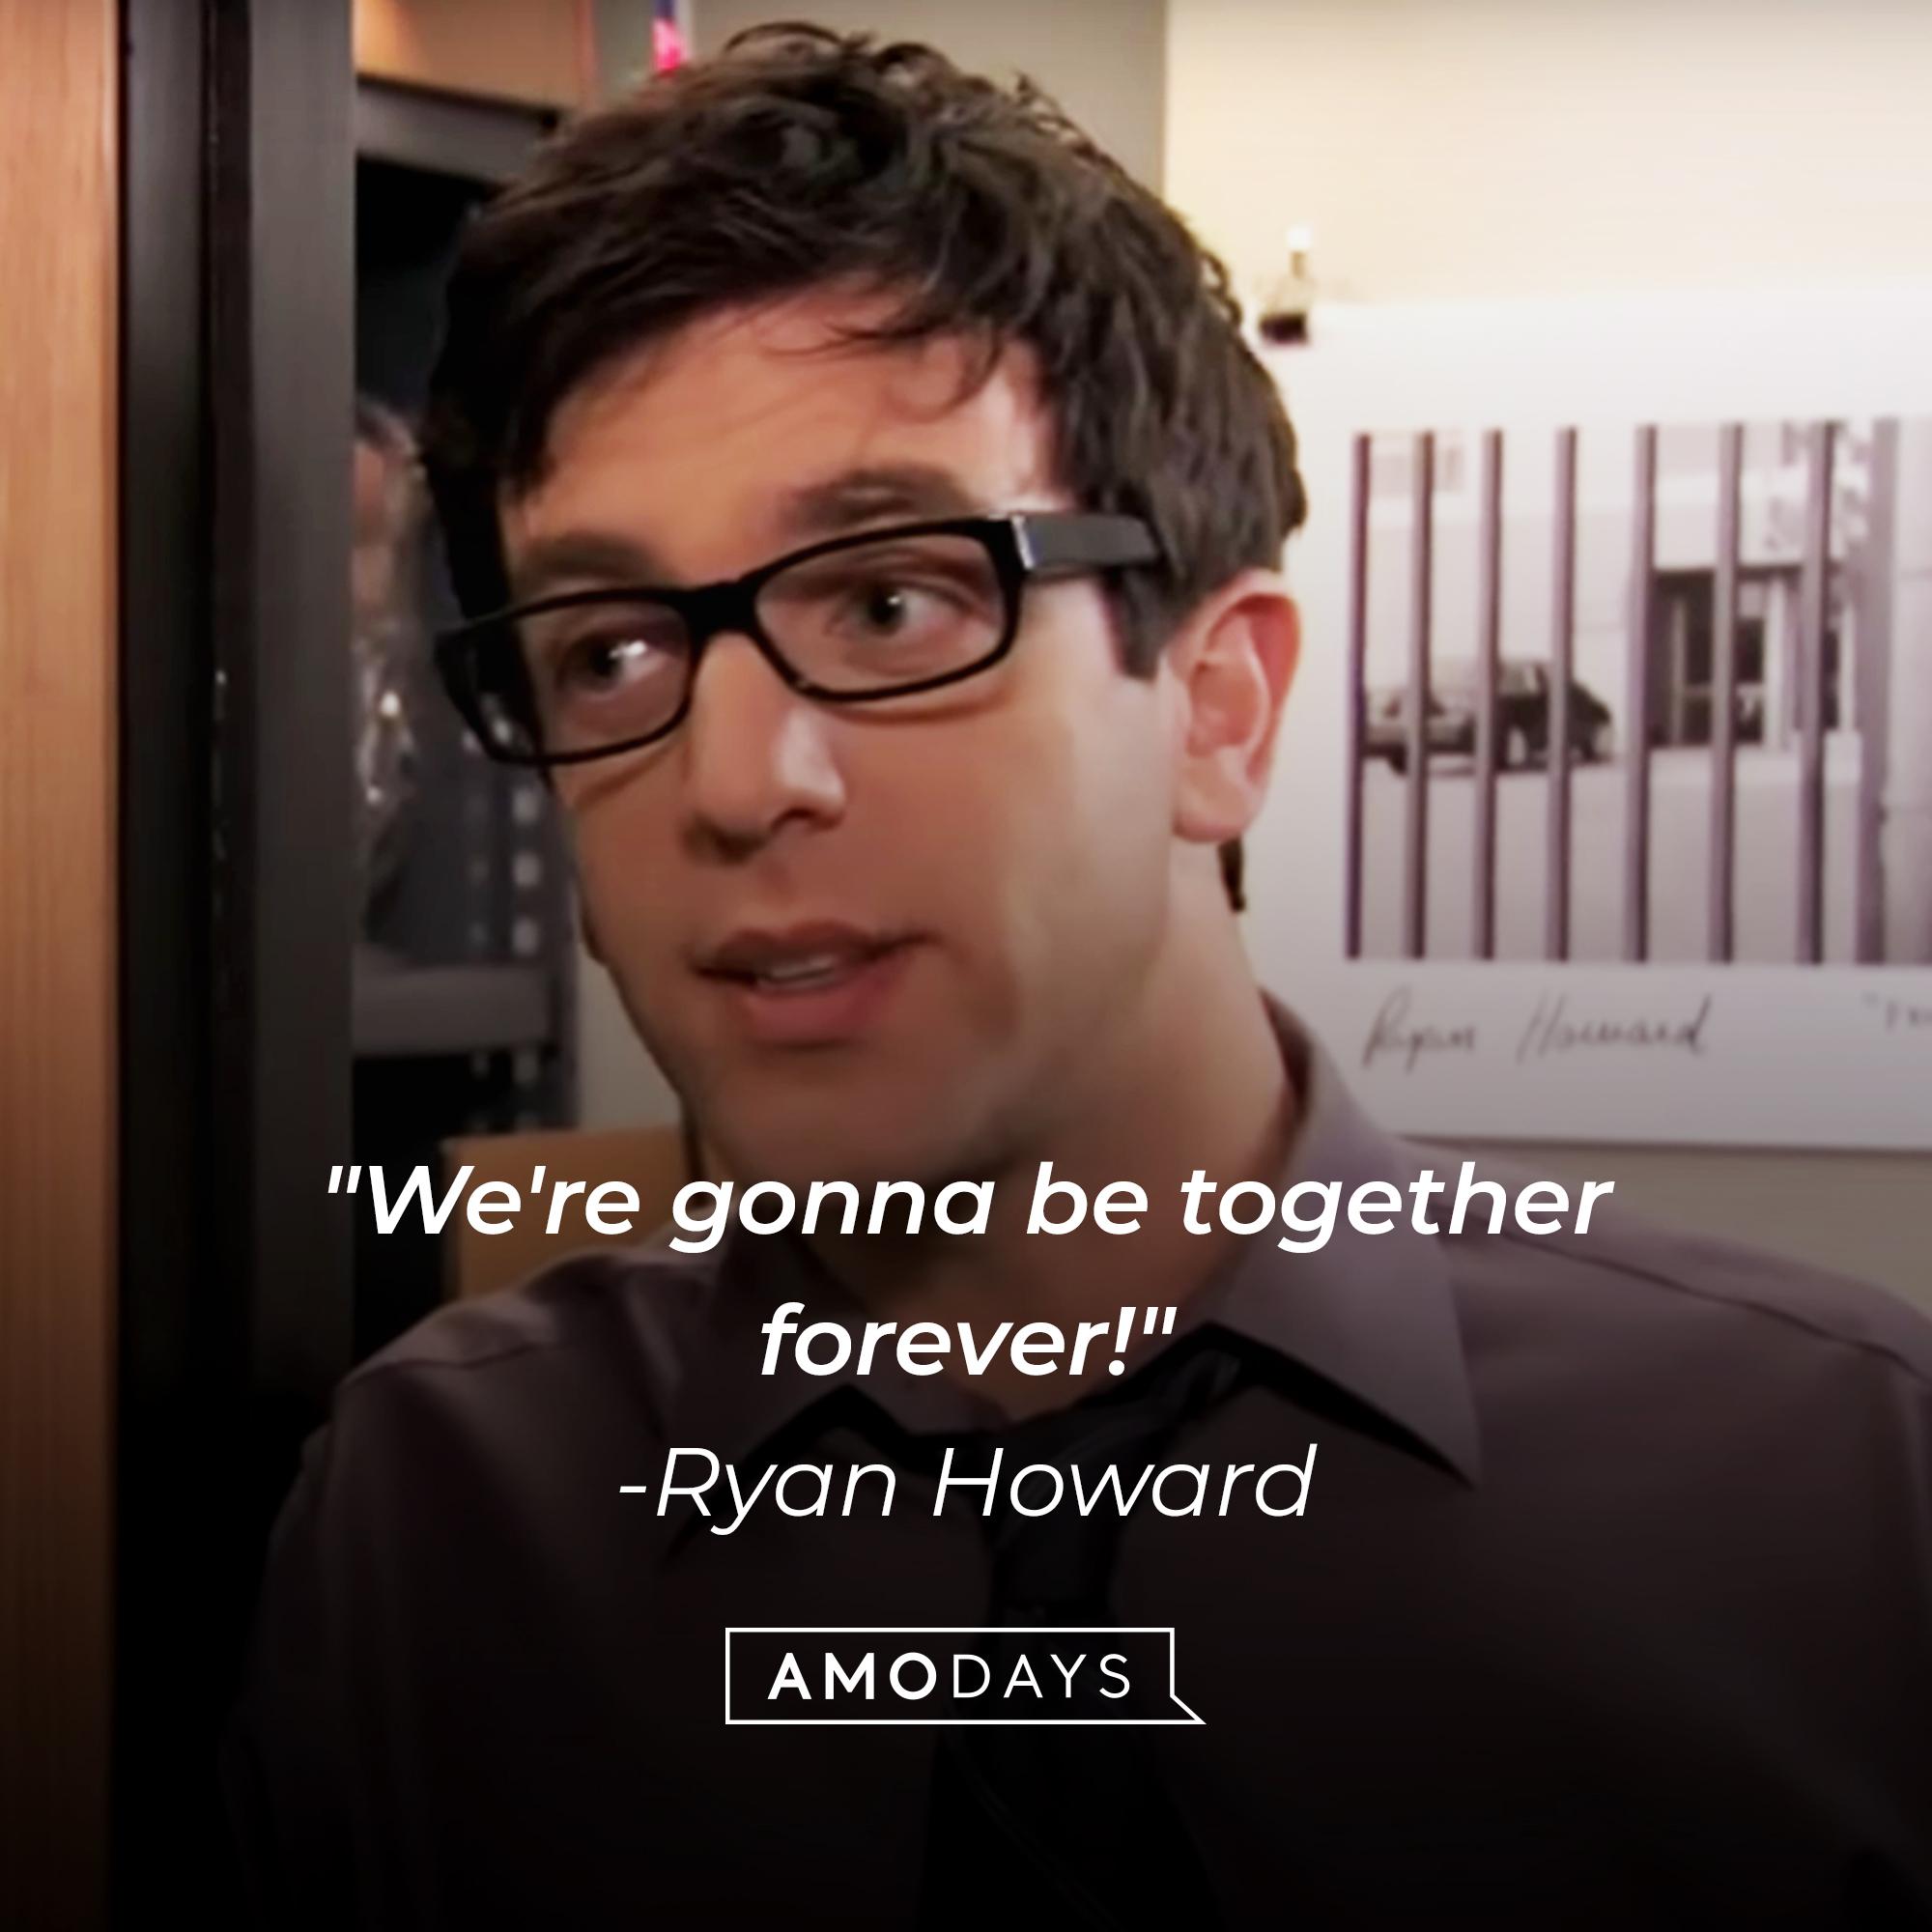 Ryan Howard's quote: "We're gonna be together forever!" | Source: YouTube/TheOffice